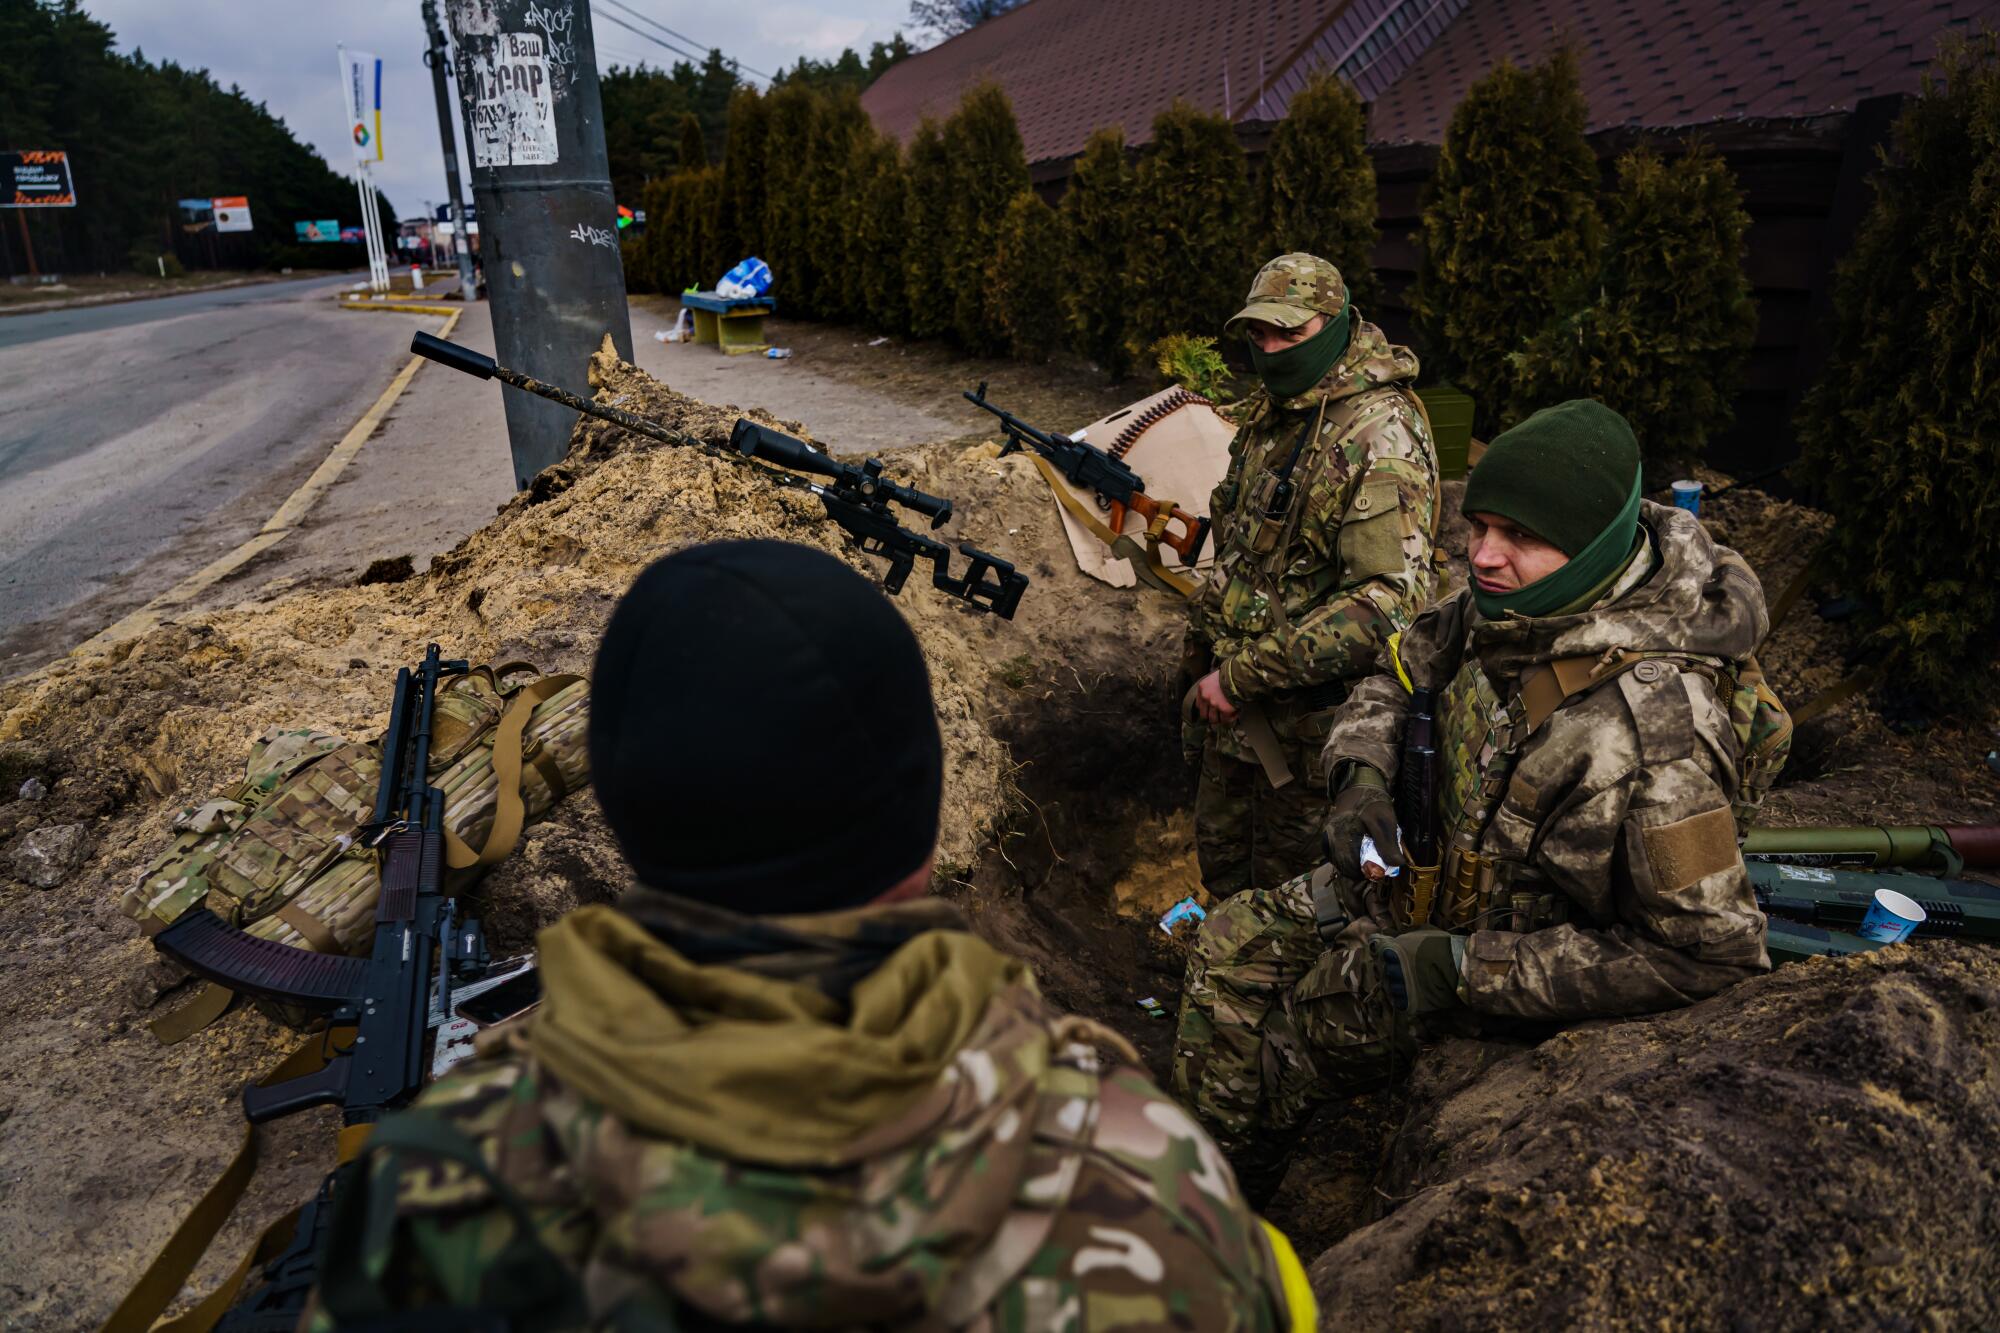 Ukrainian soldiers stand ready